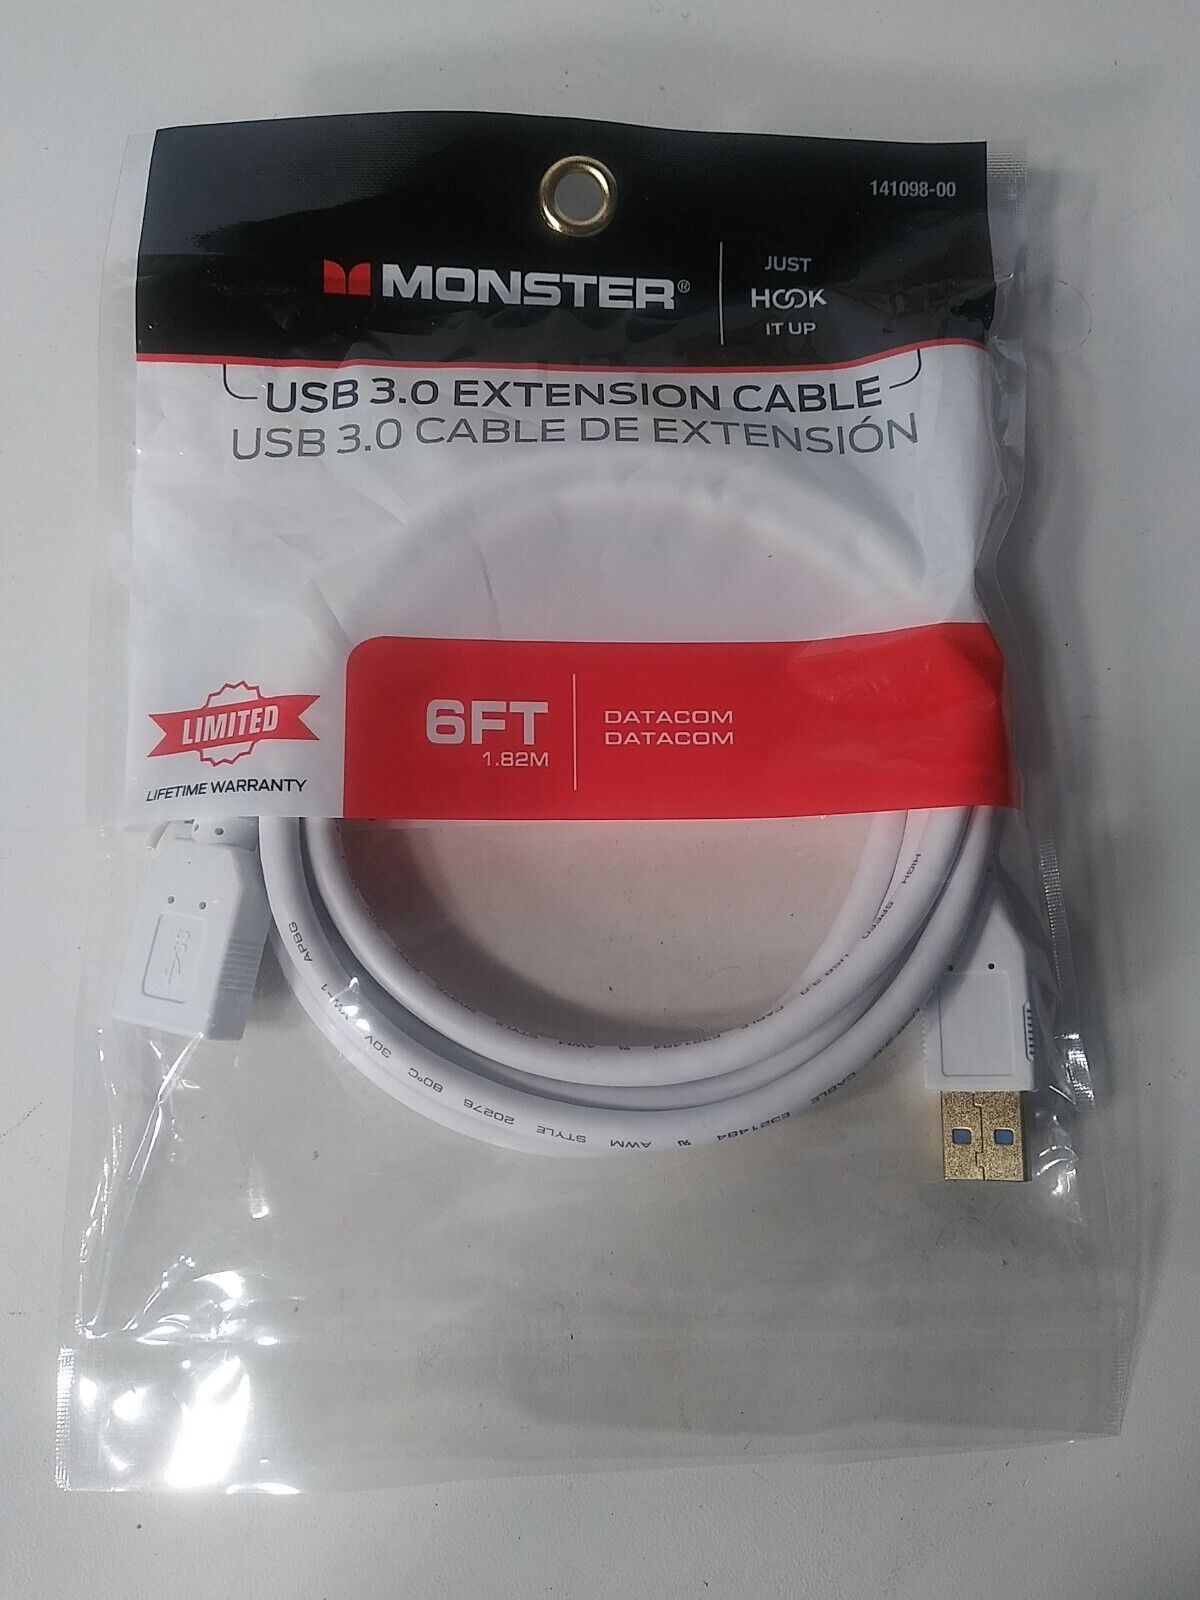 Monster 6’ High Performance USB 3.0 Extension Cable 141098-00